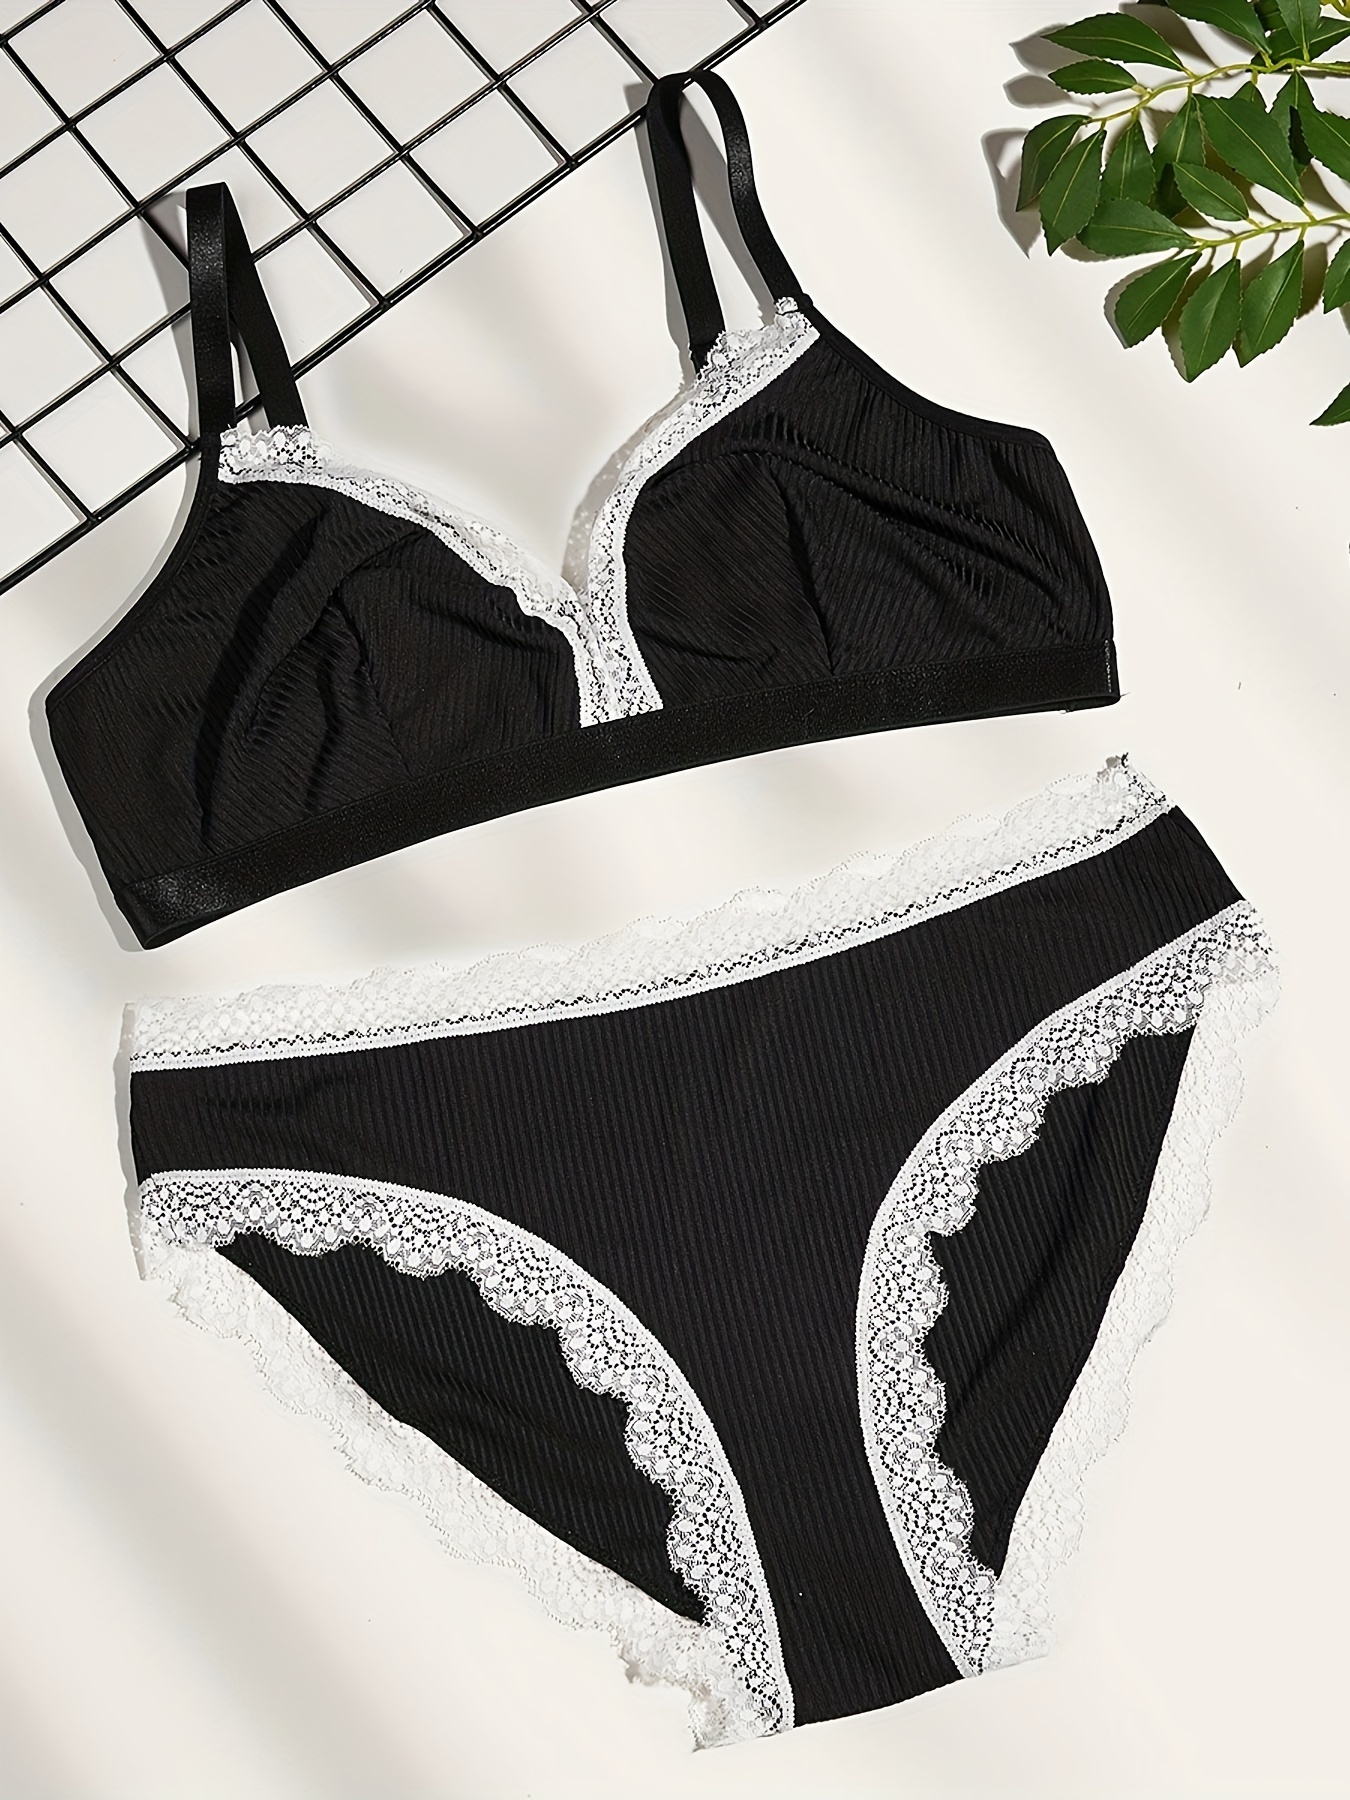 Aerie bra and thong set in black